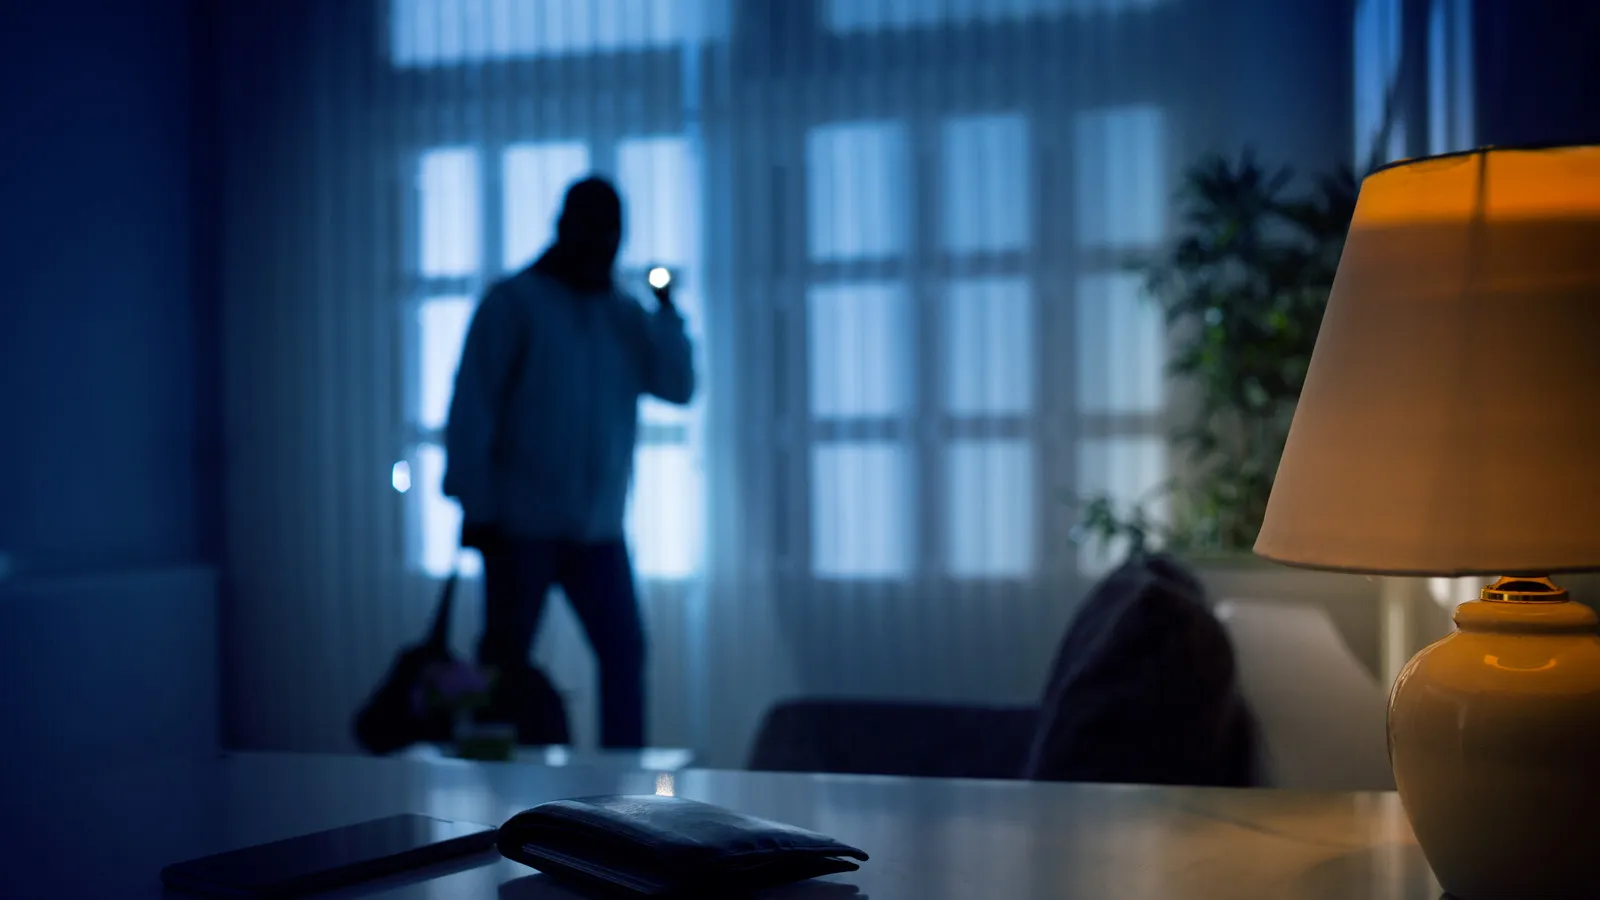 burglar in a dark room with face covered and flashlight looking at a wallet and phone